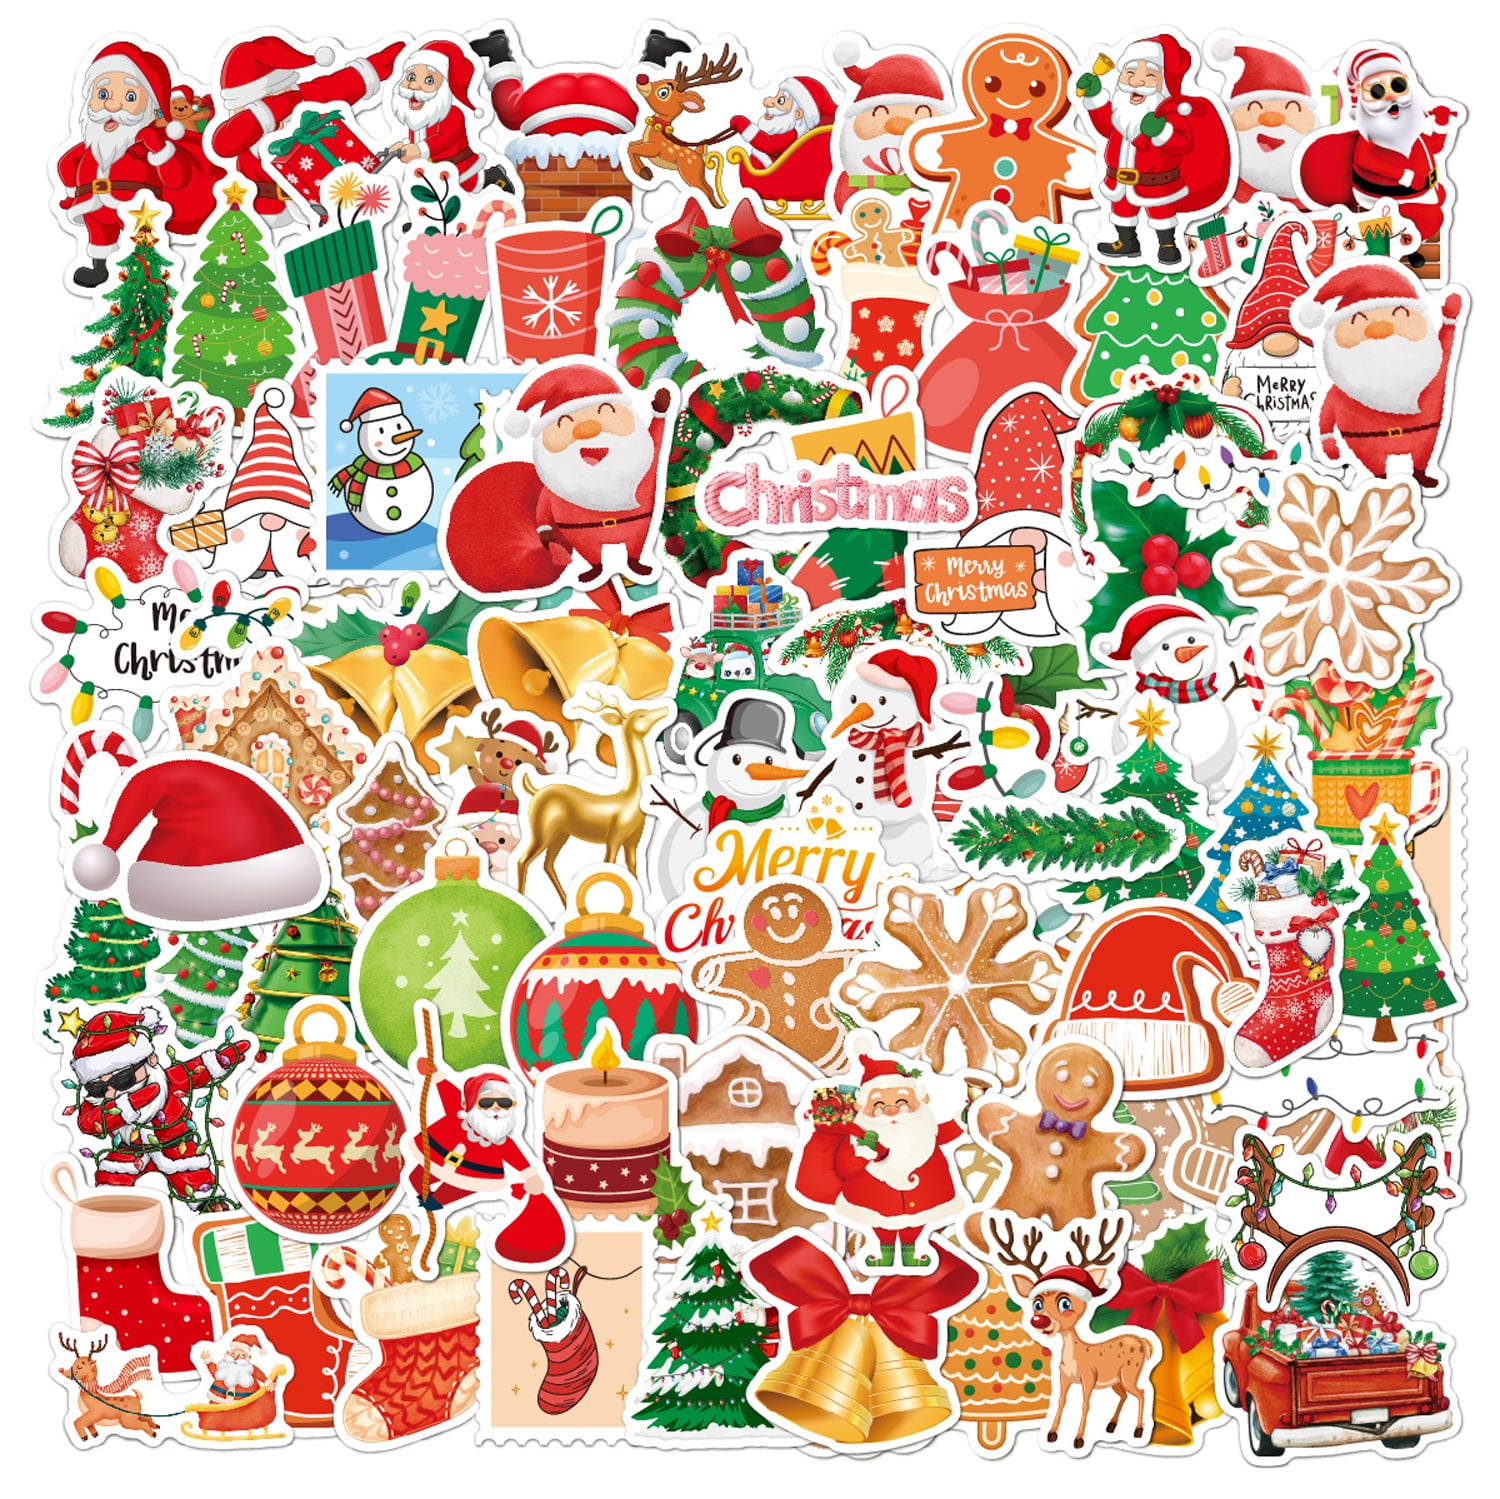 500Pcs/Roll Merry Christmas Stickers Festive Snowflake Santa Claus Reindeer  Snowman Baking Labels Envelope Seal Sticker Xmas Decor – the best products  in the Joom Geek online store